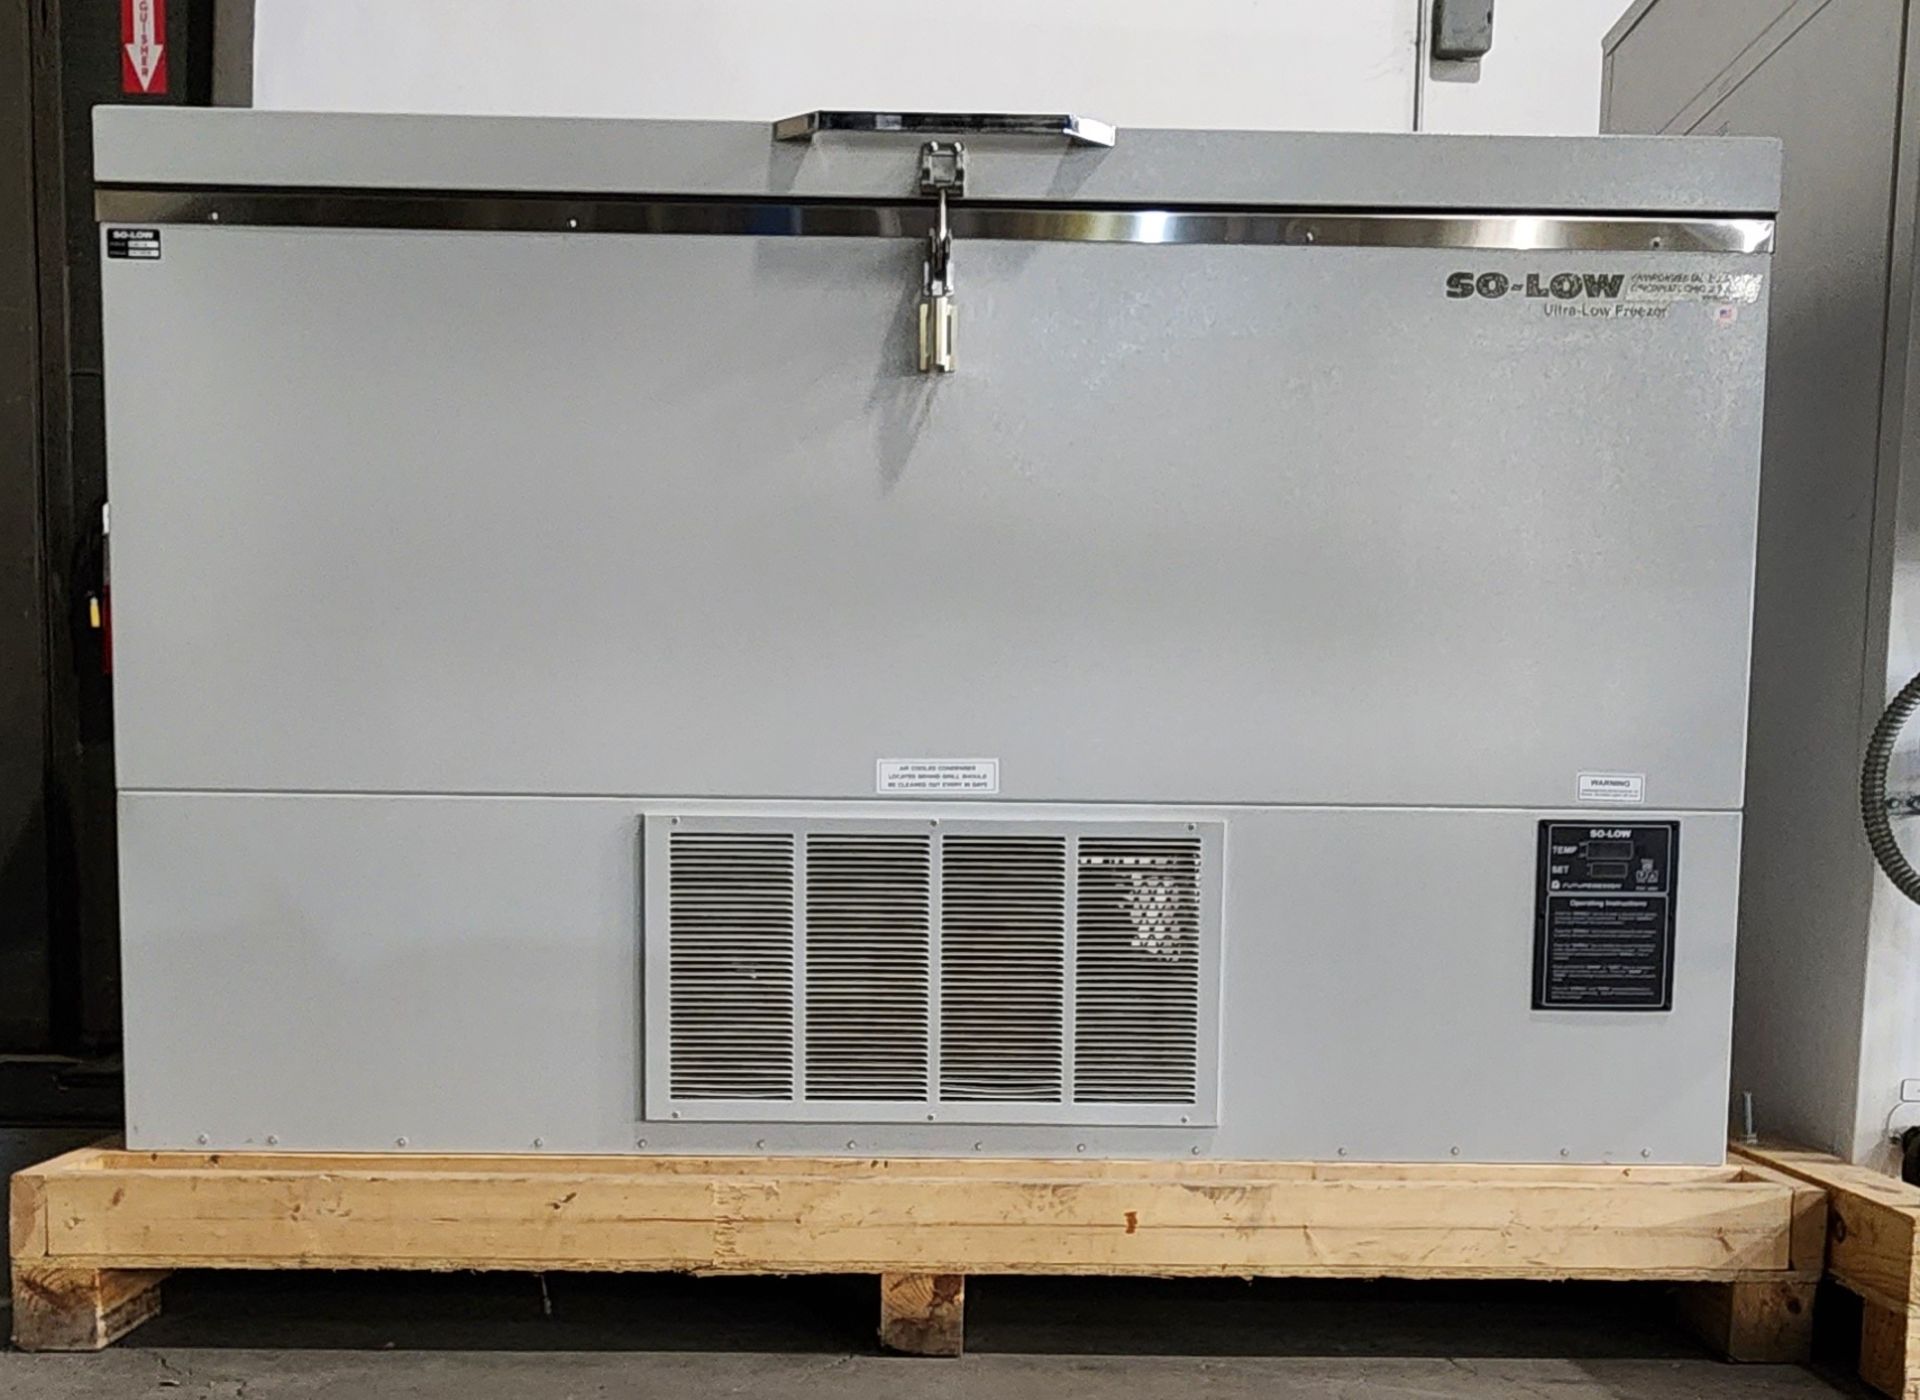 Used So-Low Explosion Proof Chest-Style Freezer. Model C40-17